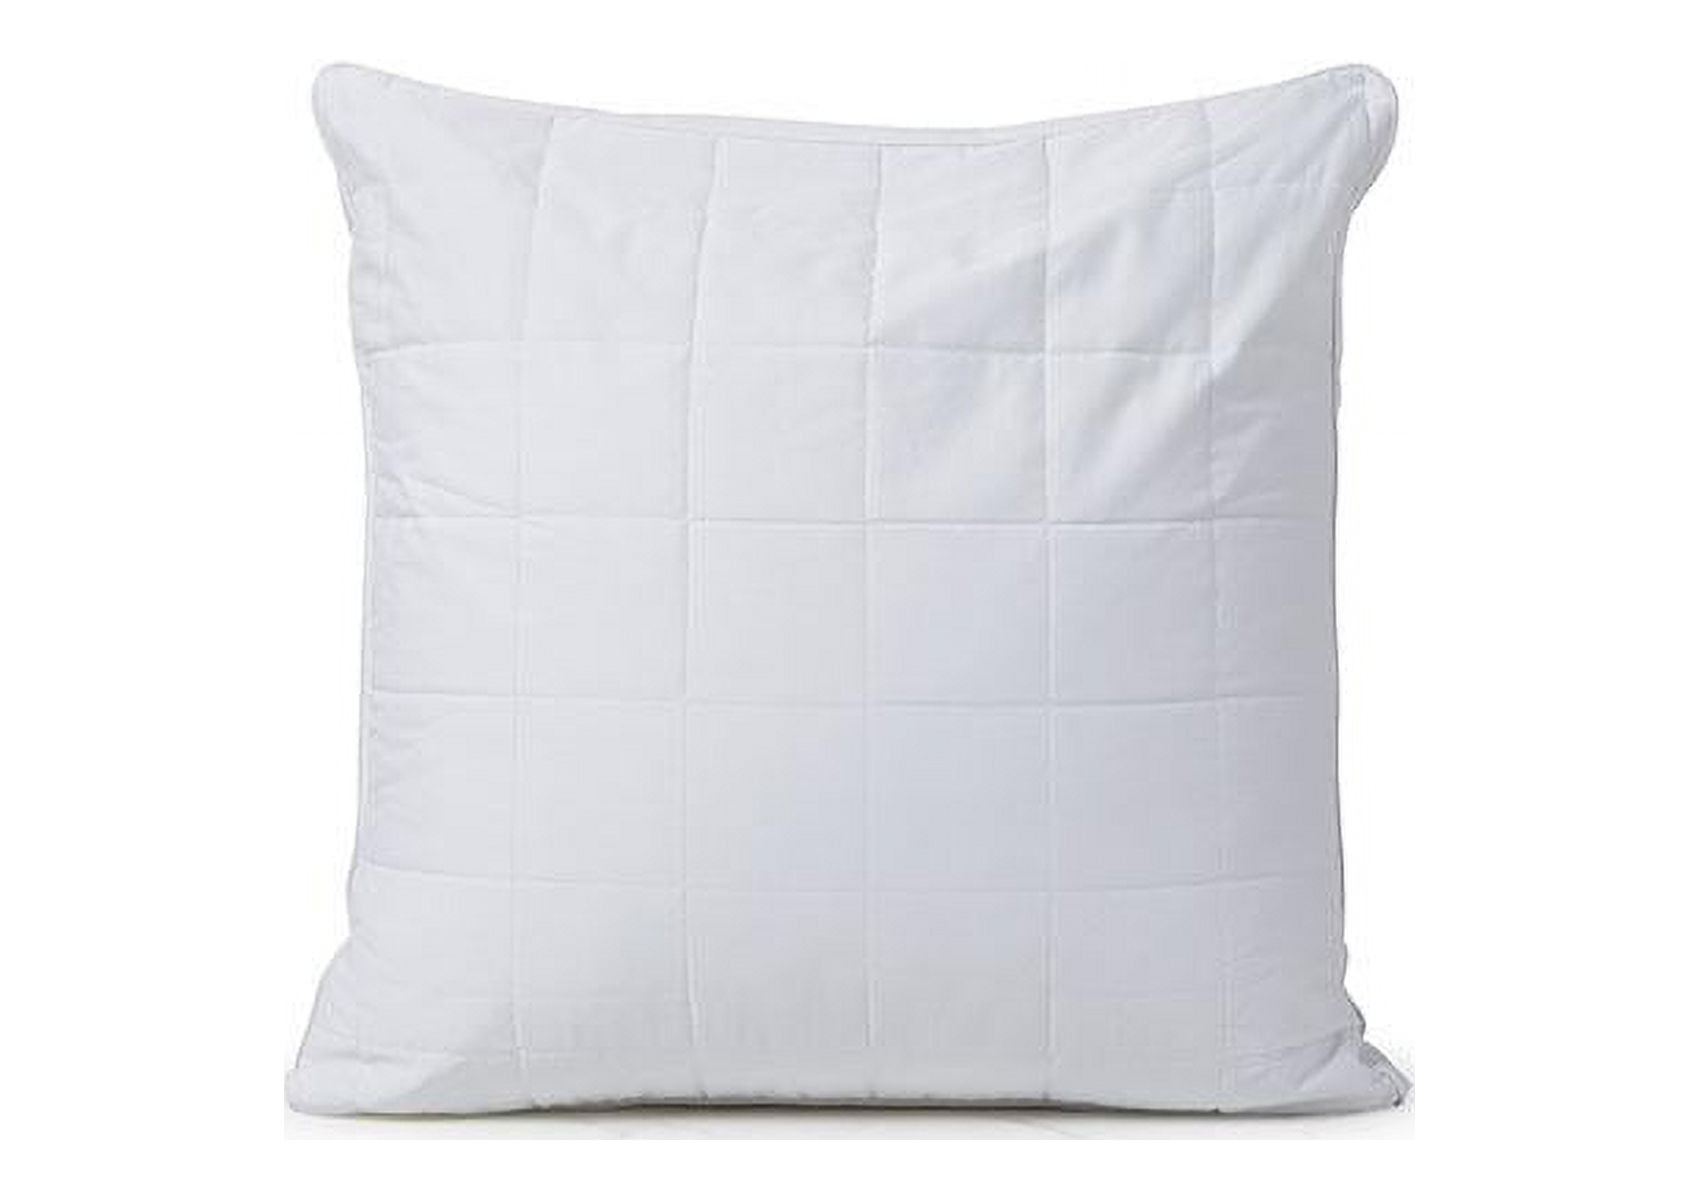 14x14 Pillow Insert 14 Inch Square Pillows Stuffing Throw Inserts Sham  Cushion Made in USA Bulk Euro Toss 